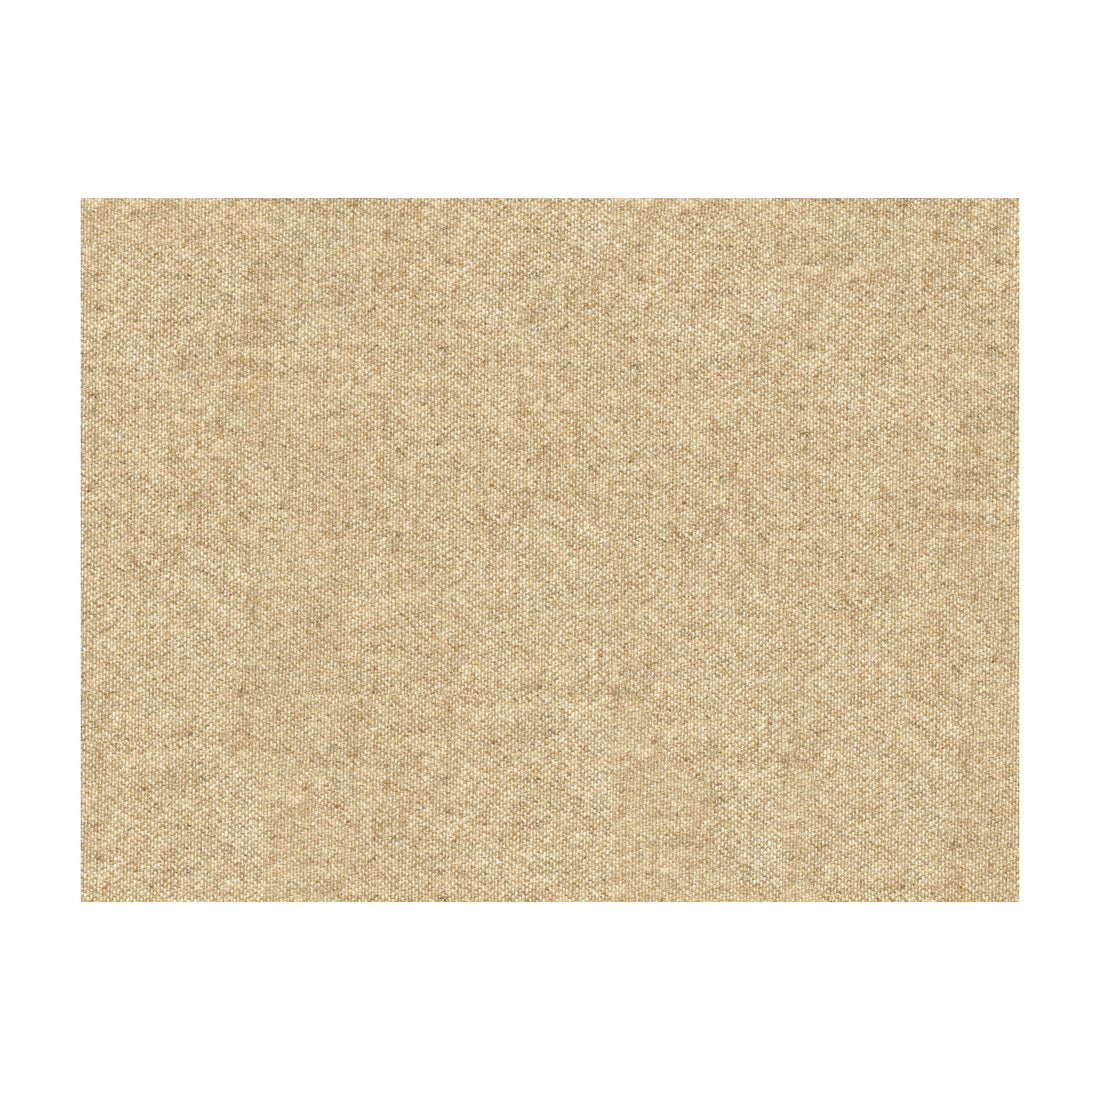 Chevalier Wool fabric in oatmeal color - pattern 8013149.1116.0 - by Brunschwig &amp; Fils